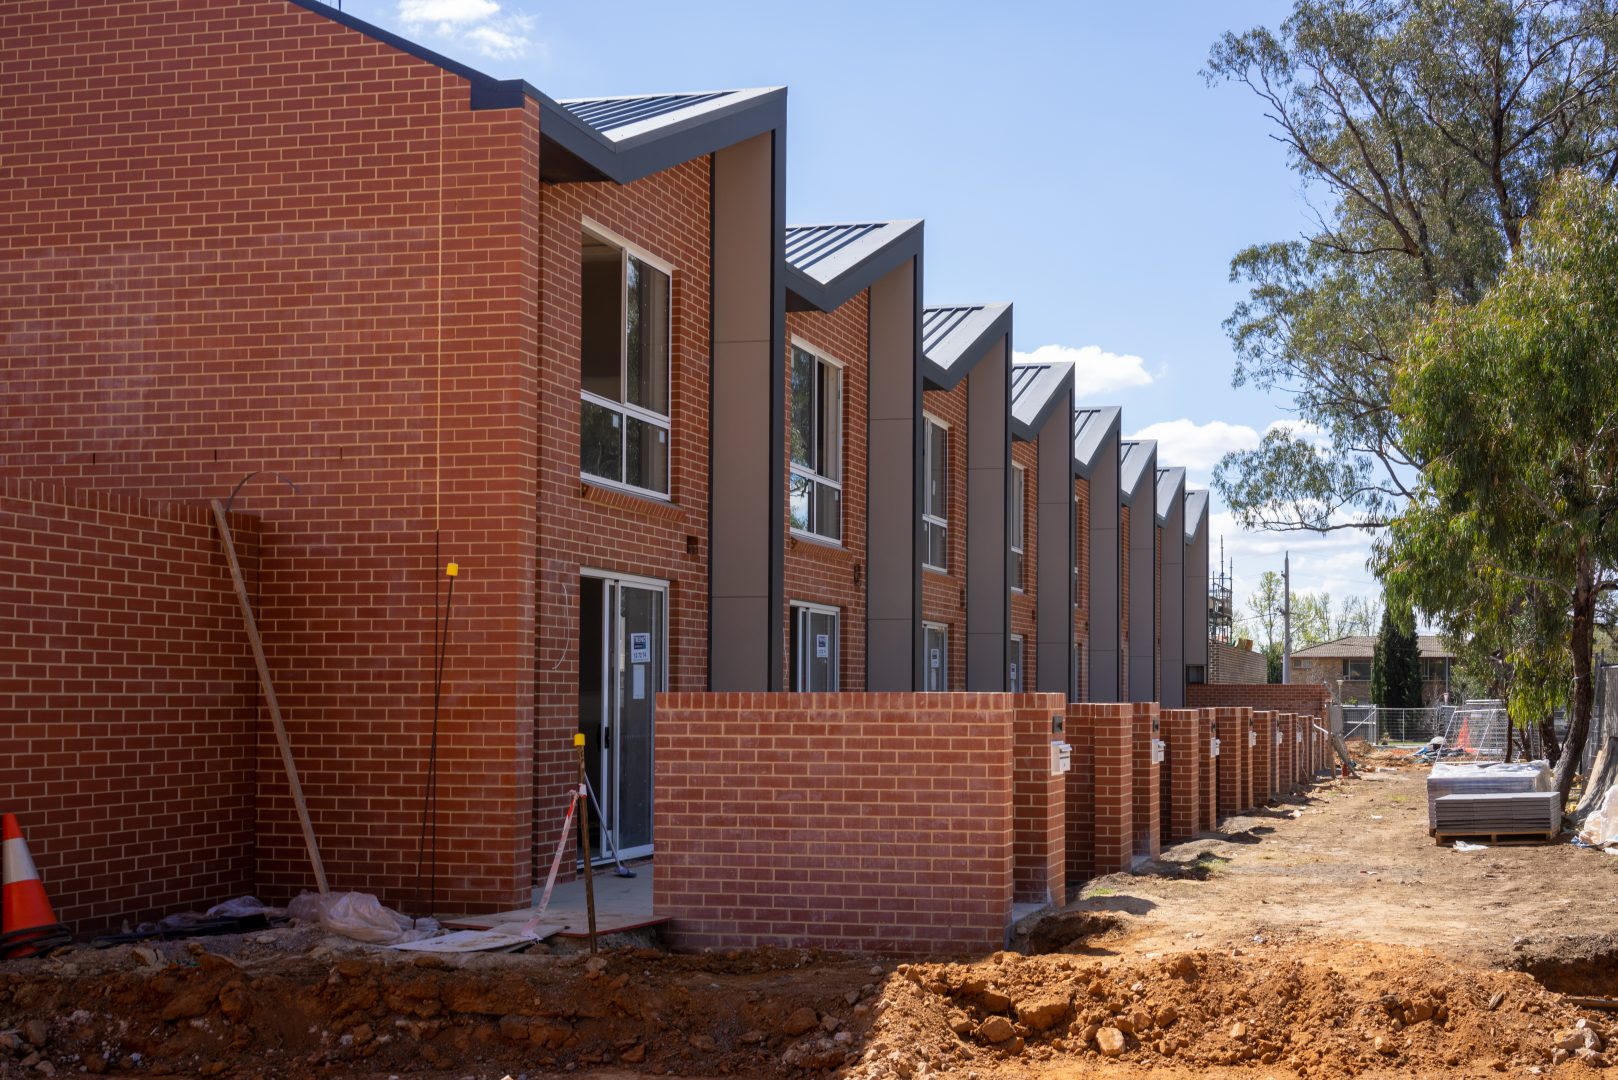 The Bradfield Construction Update Jan 2020 (image supplied by the developer)